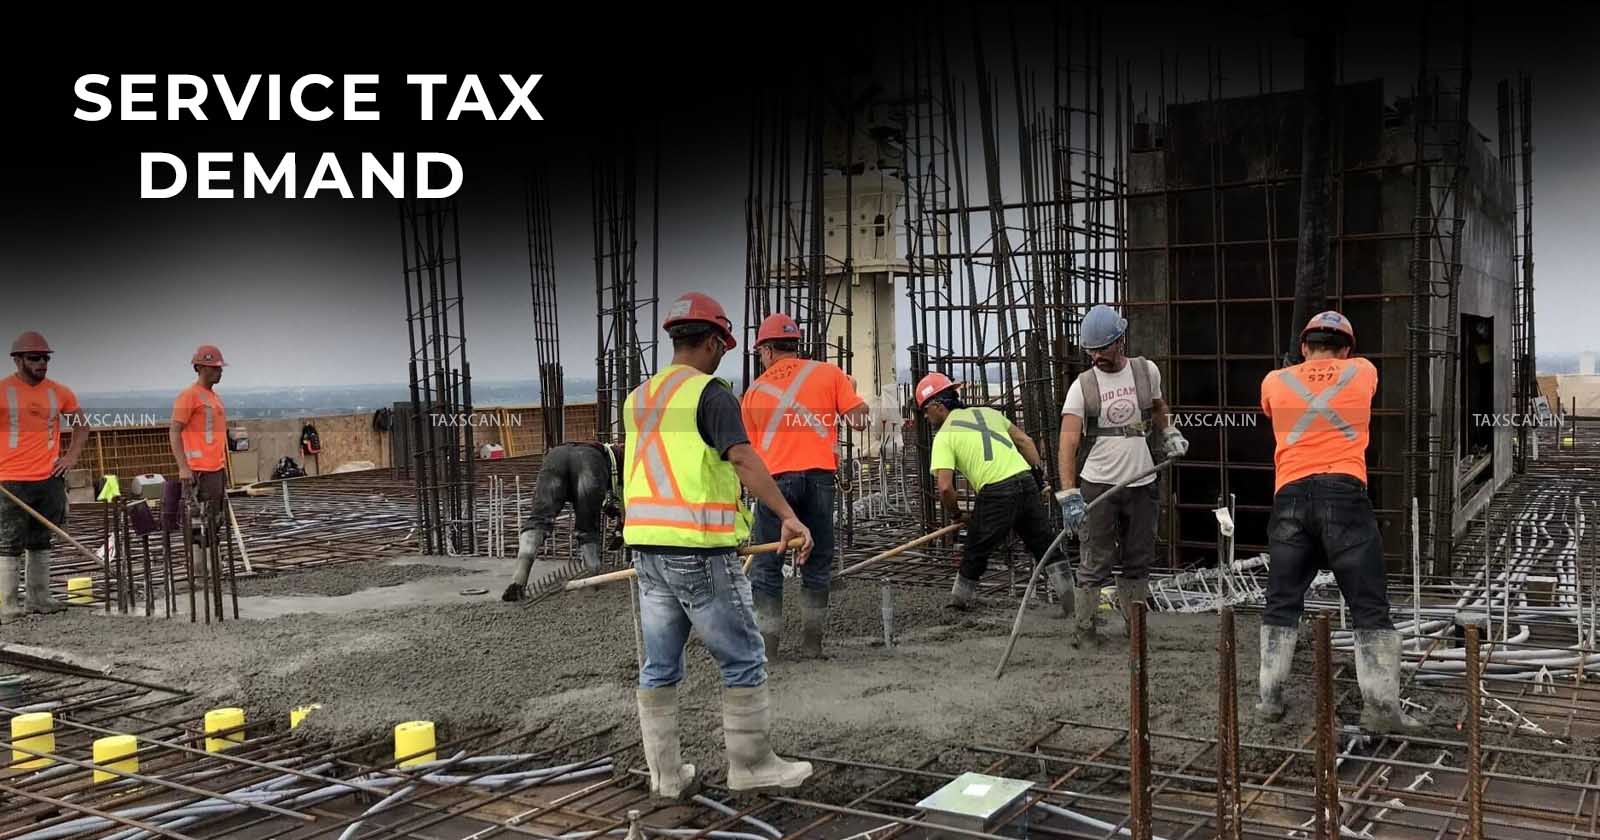 Service Tax Demand on Composite Contracts - Commercial Construction Services - Service Tax Demand - Industrial Construction Services - CESTAT - taxscan